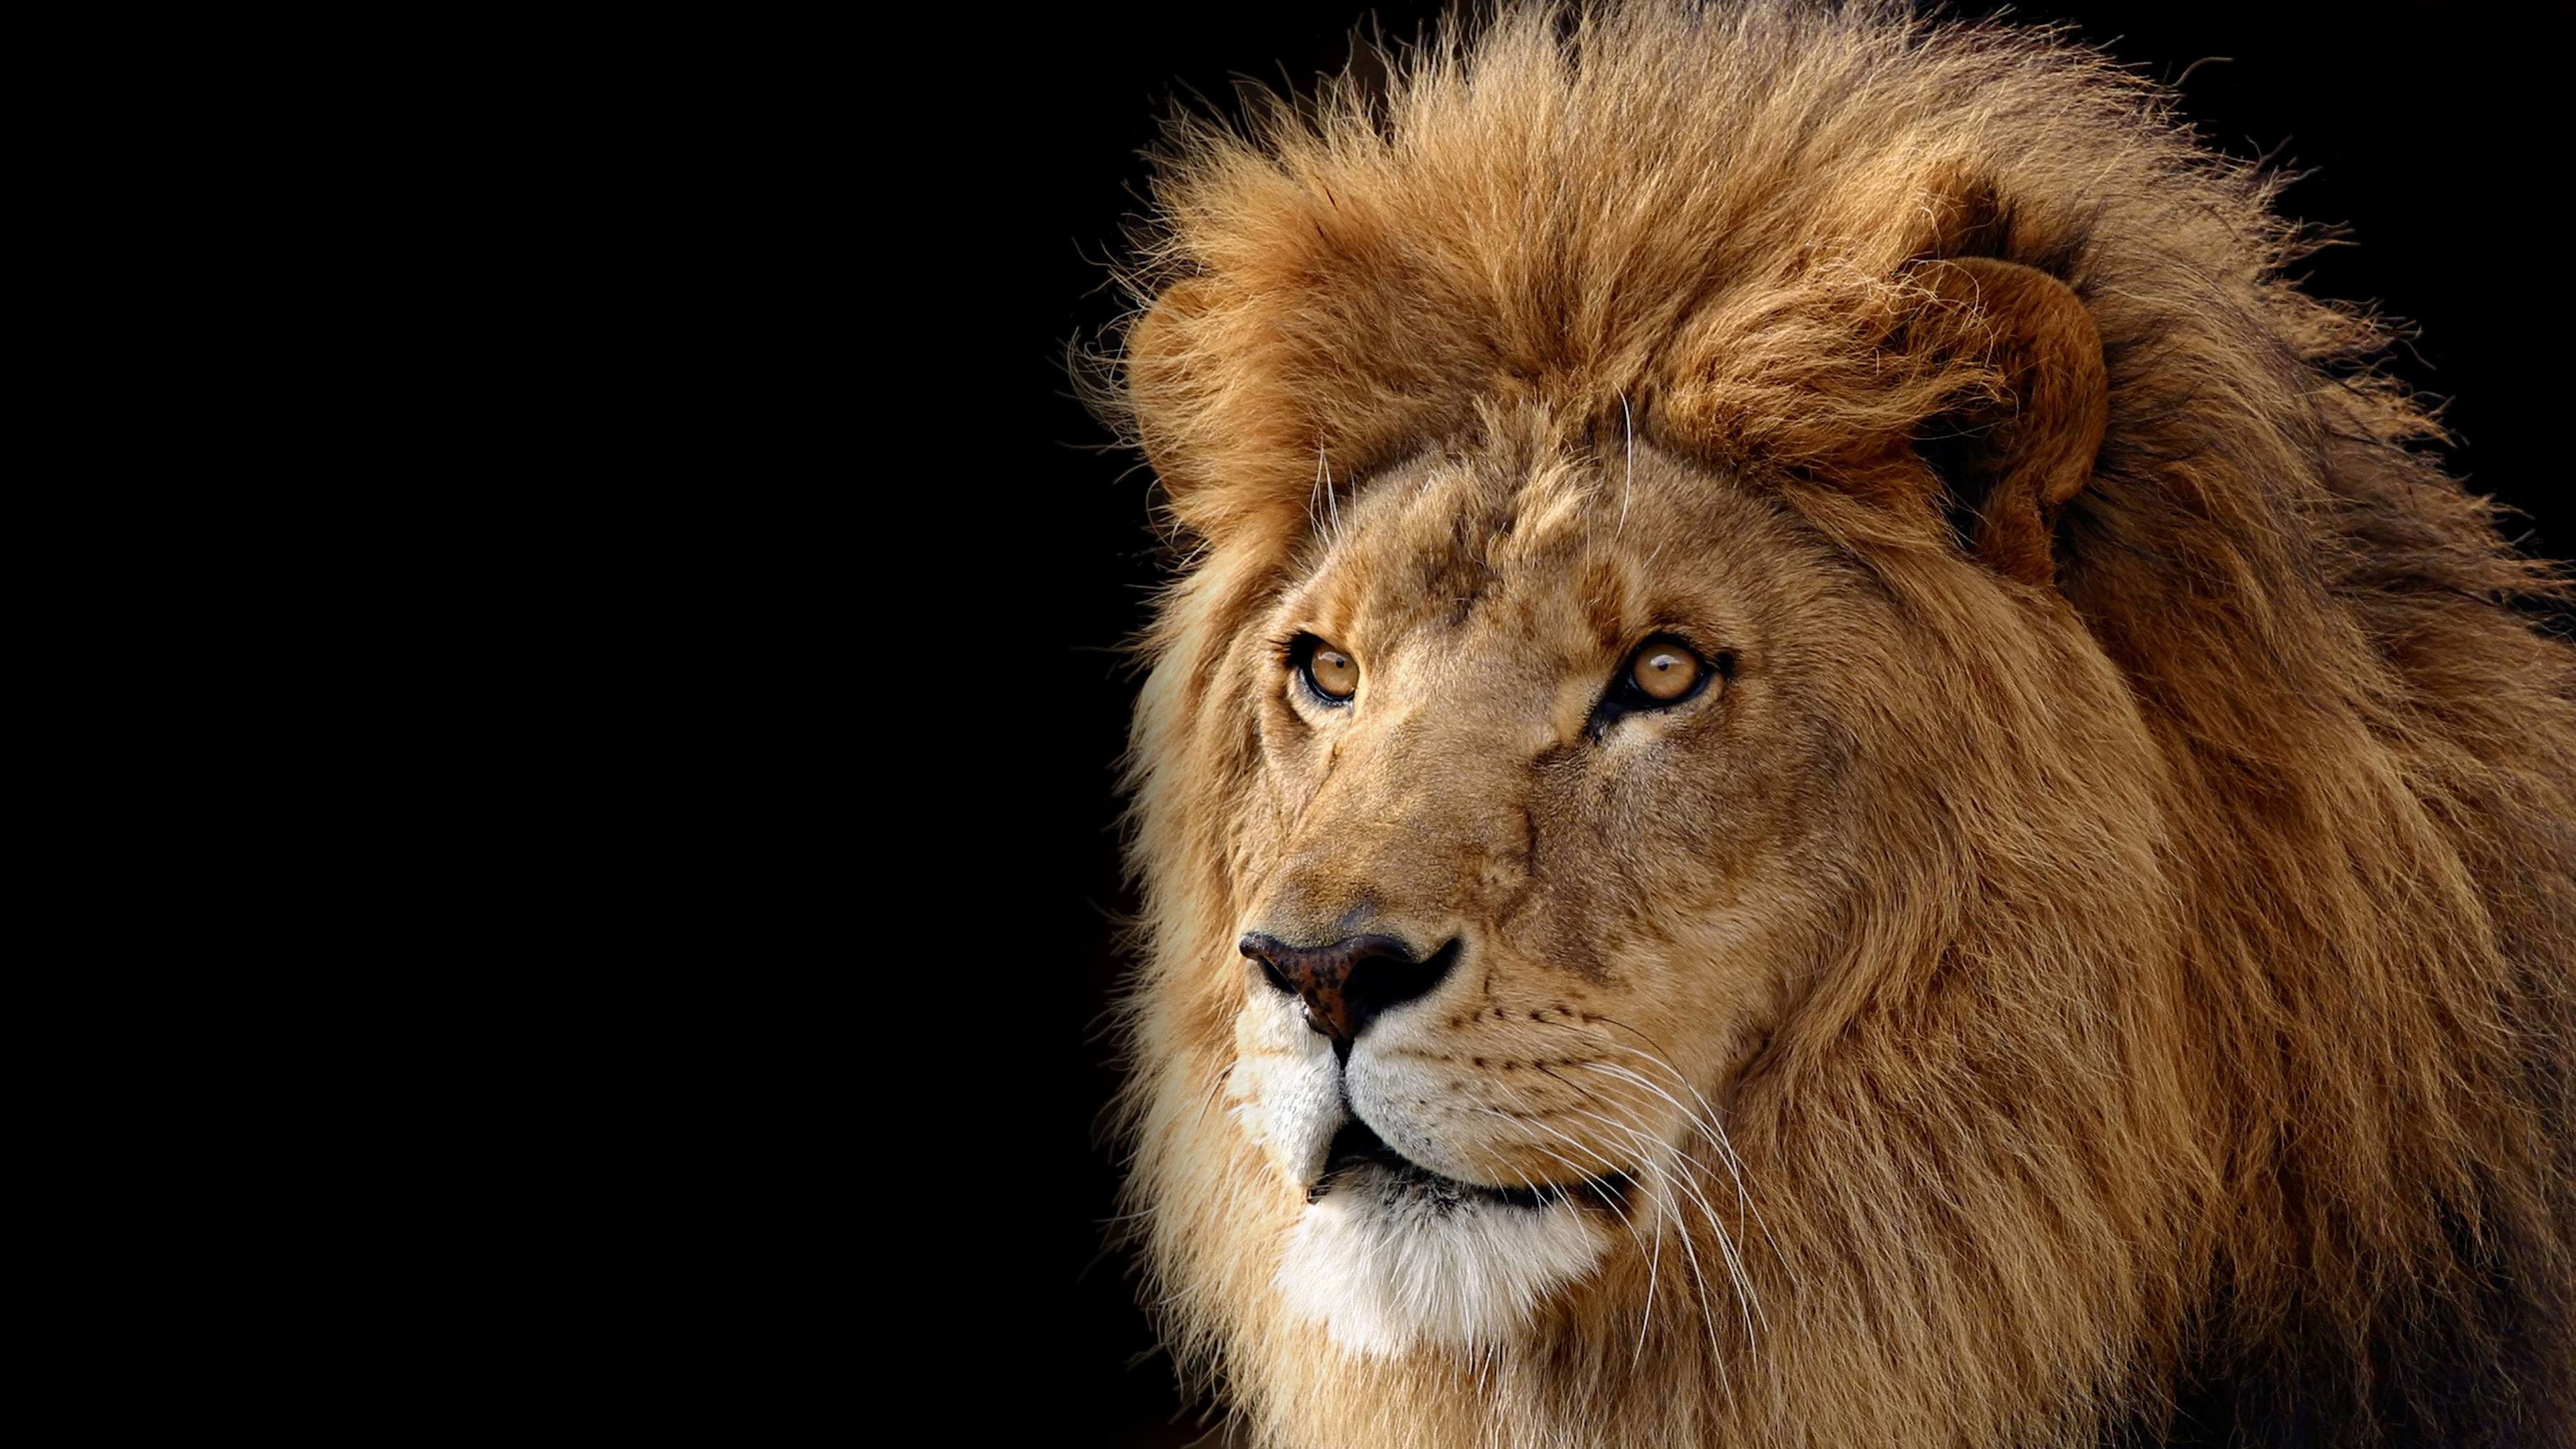 3641x2048 lion hd wallpapers download | HD Wallpapers | Pinterest | Lion wallpaper,  Lions and Wallpaper